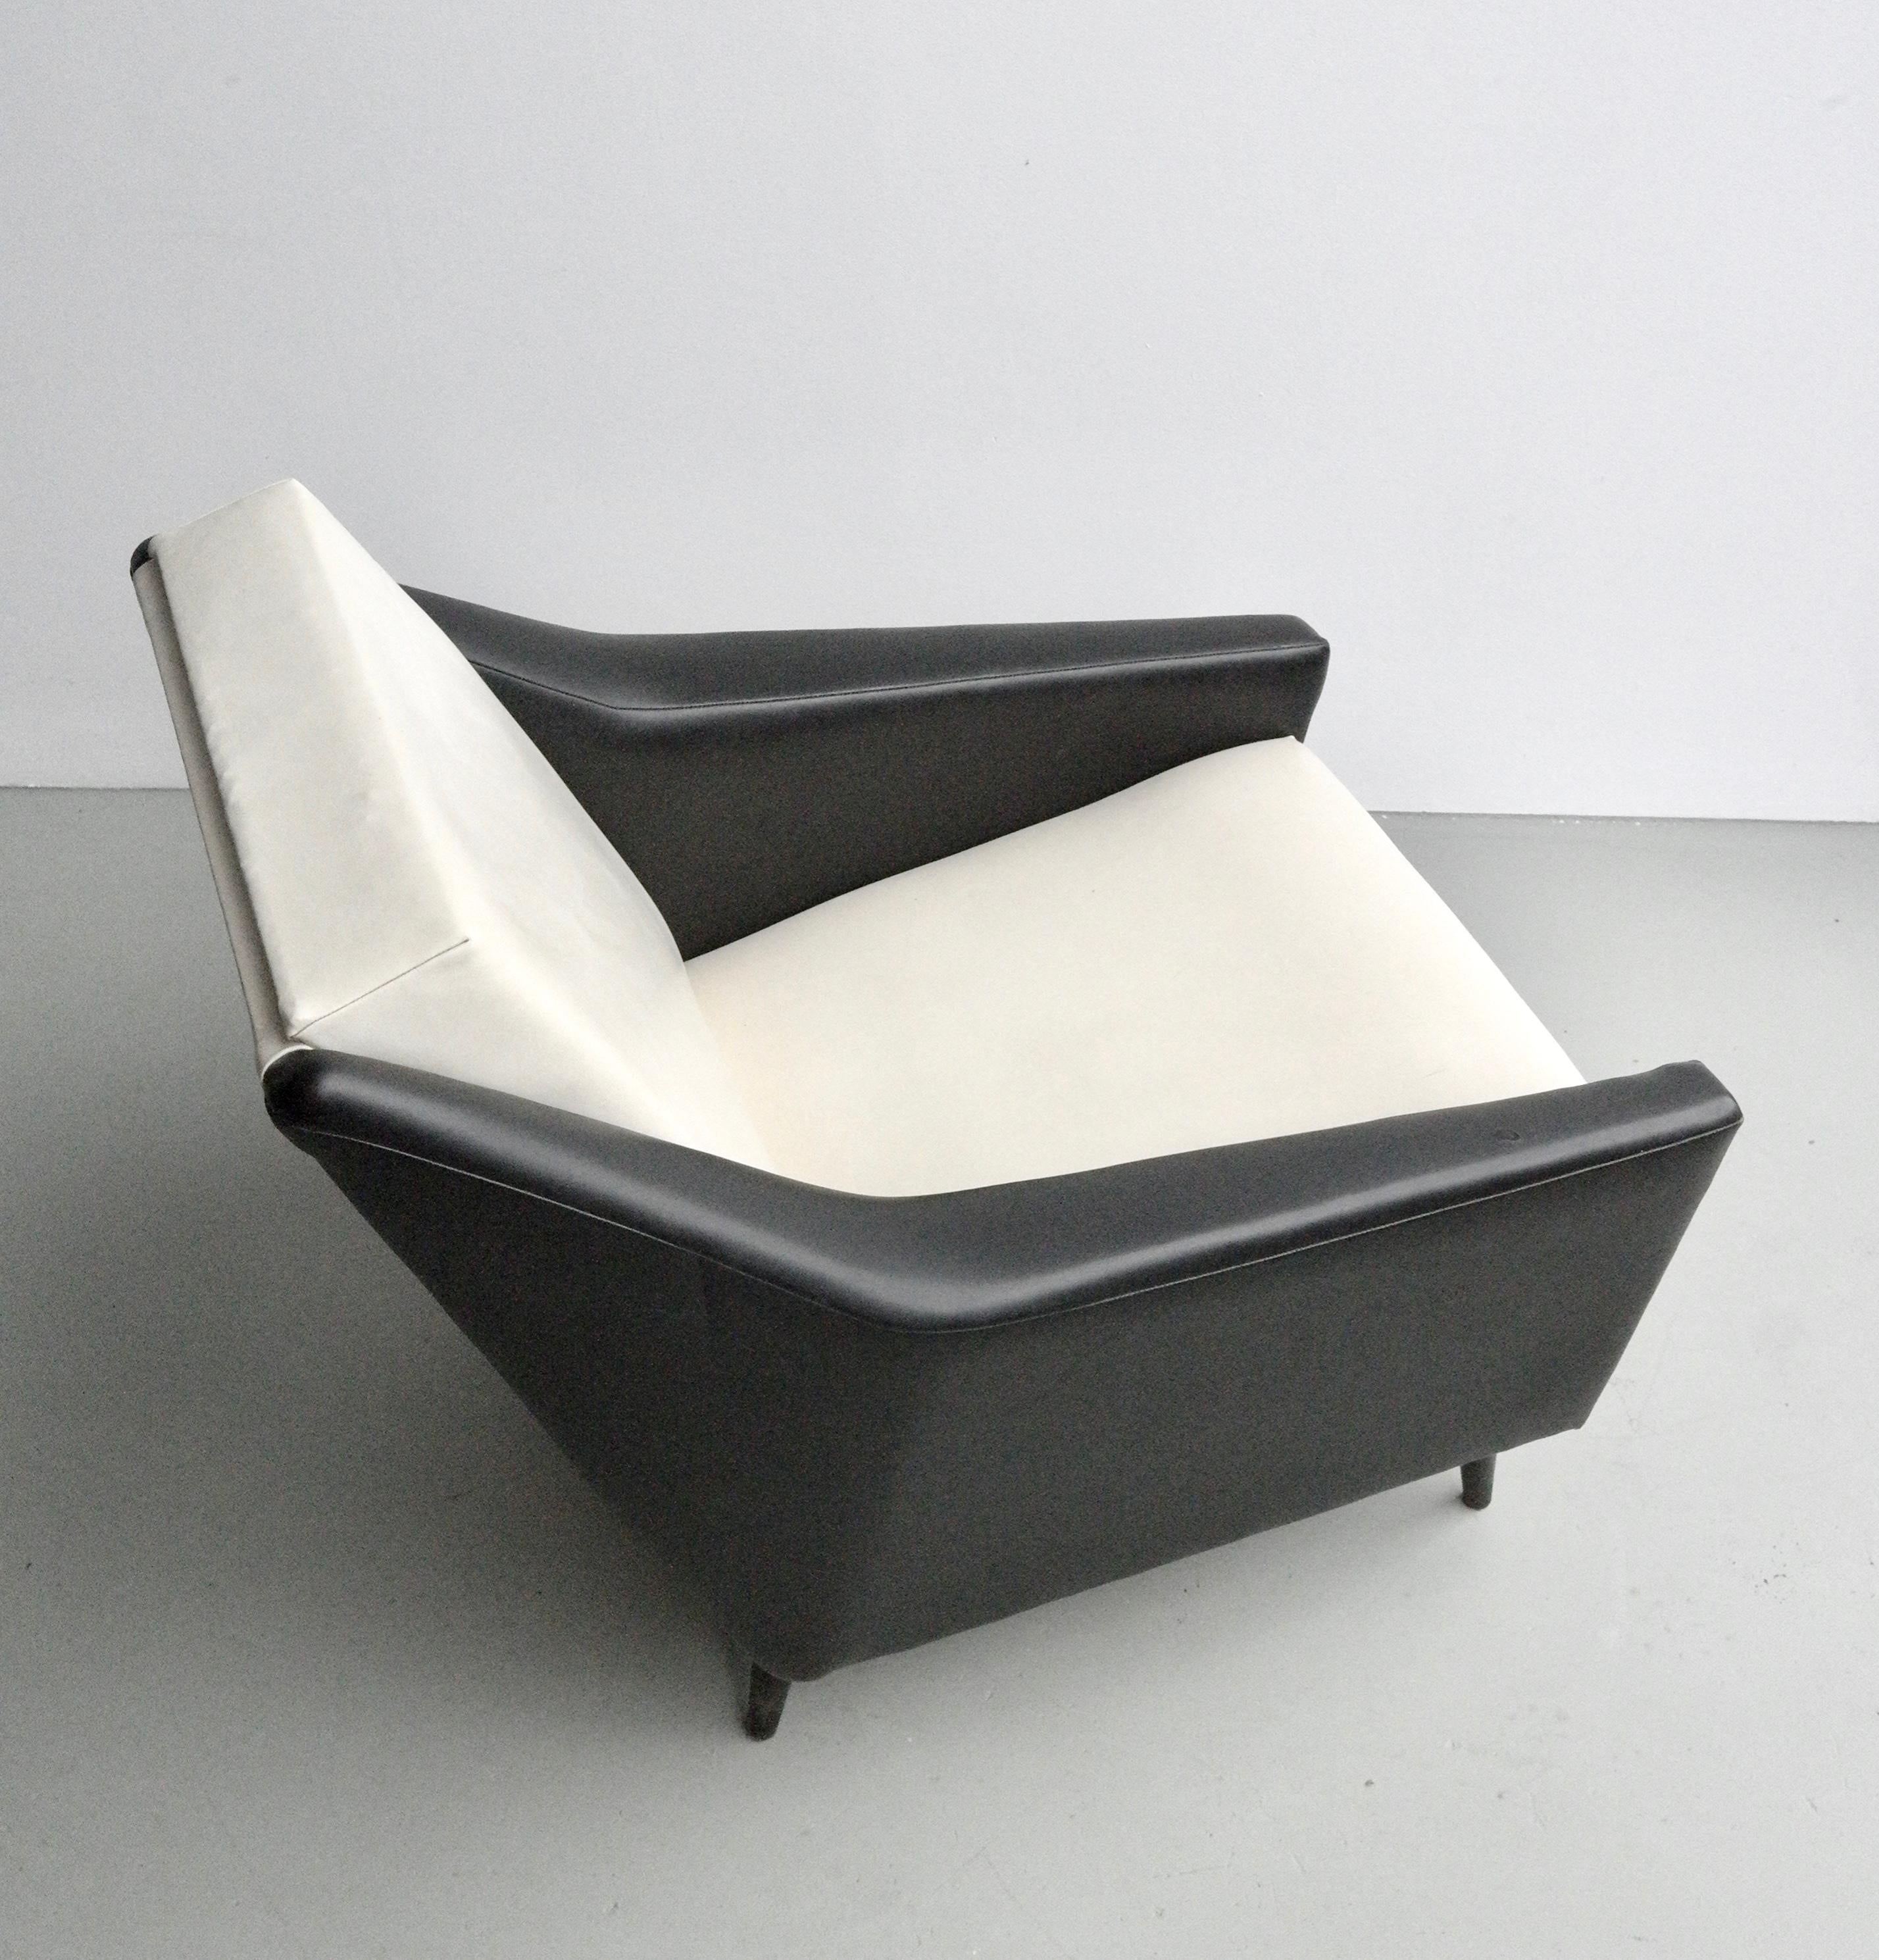 Black and white Distex style lounge chair, Italy, 1950s.